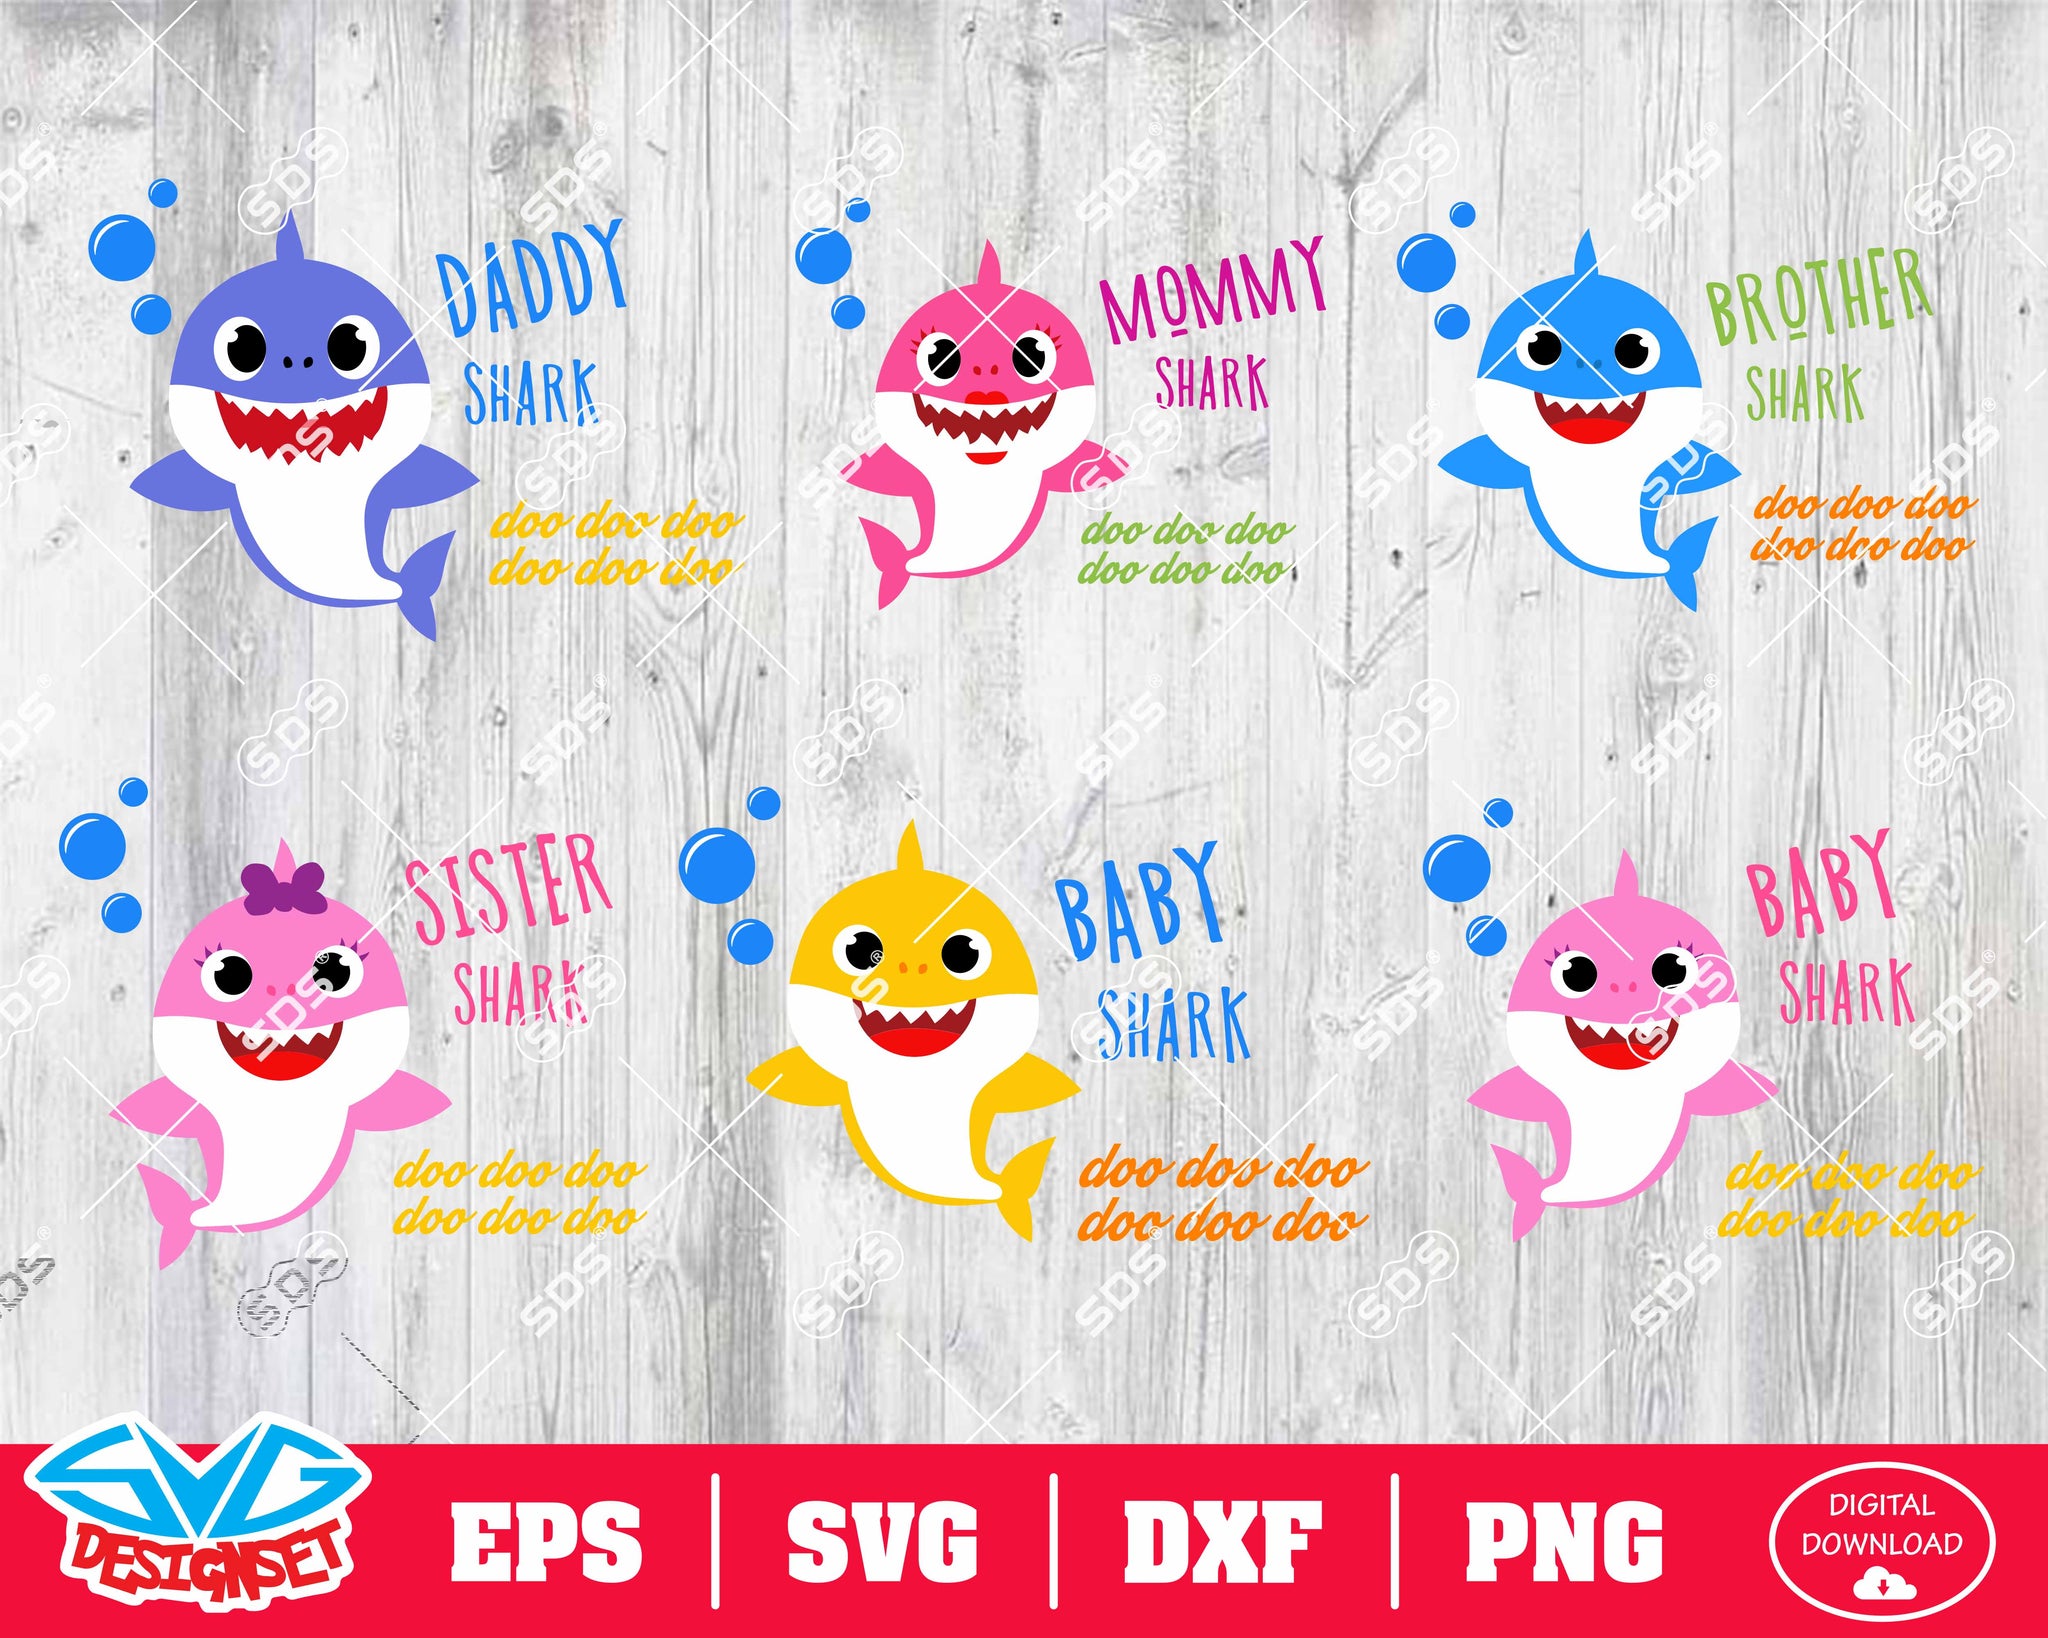 Shark Bundle Svg, Dxf, Eps, Png, Clipart, Silhouette and Cutfiles #3 - SVGDesignSets